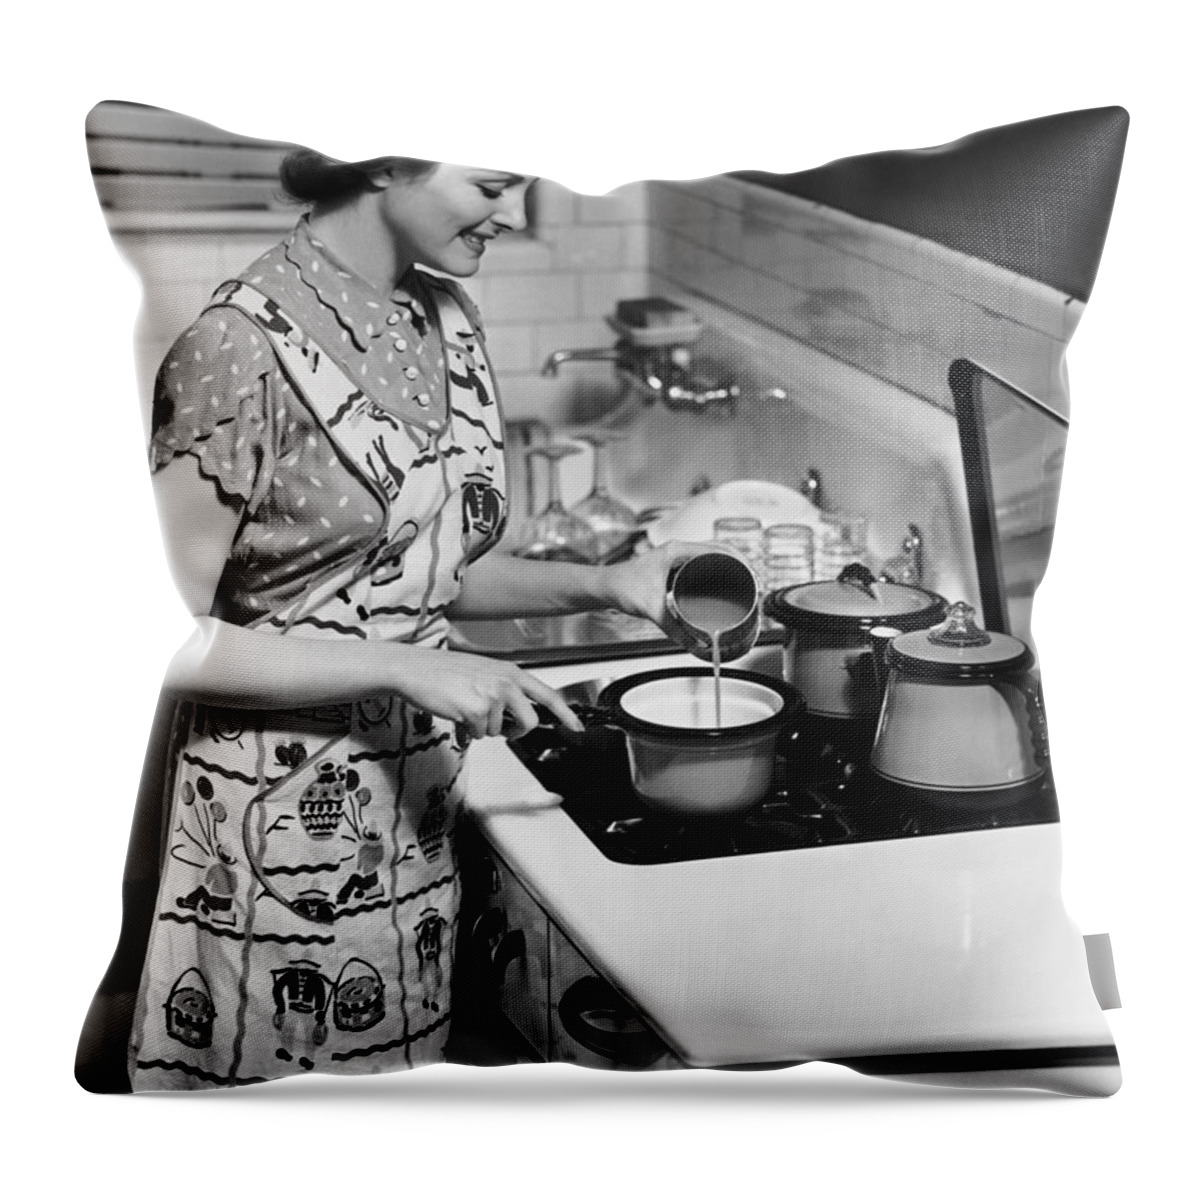 Working Throw Pillow featuring the photograph Woman Preparing Food On Stove by George Marks